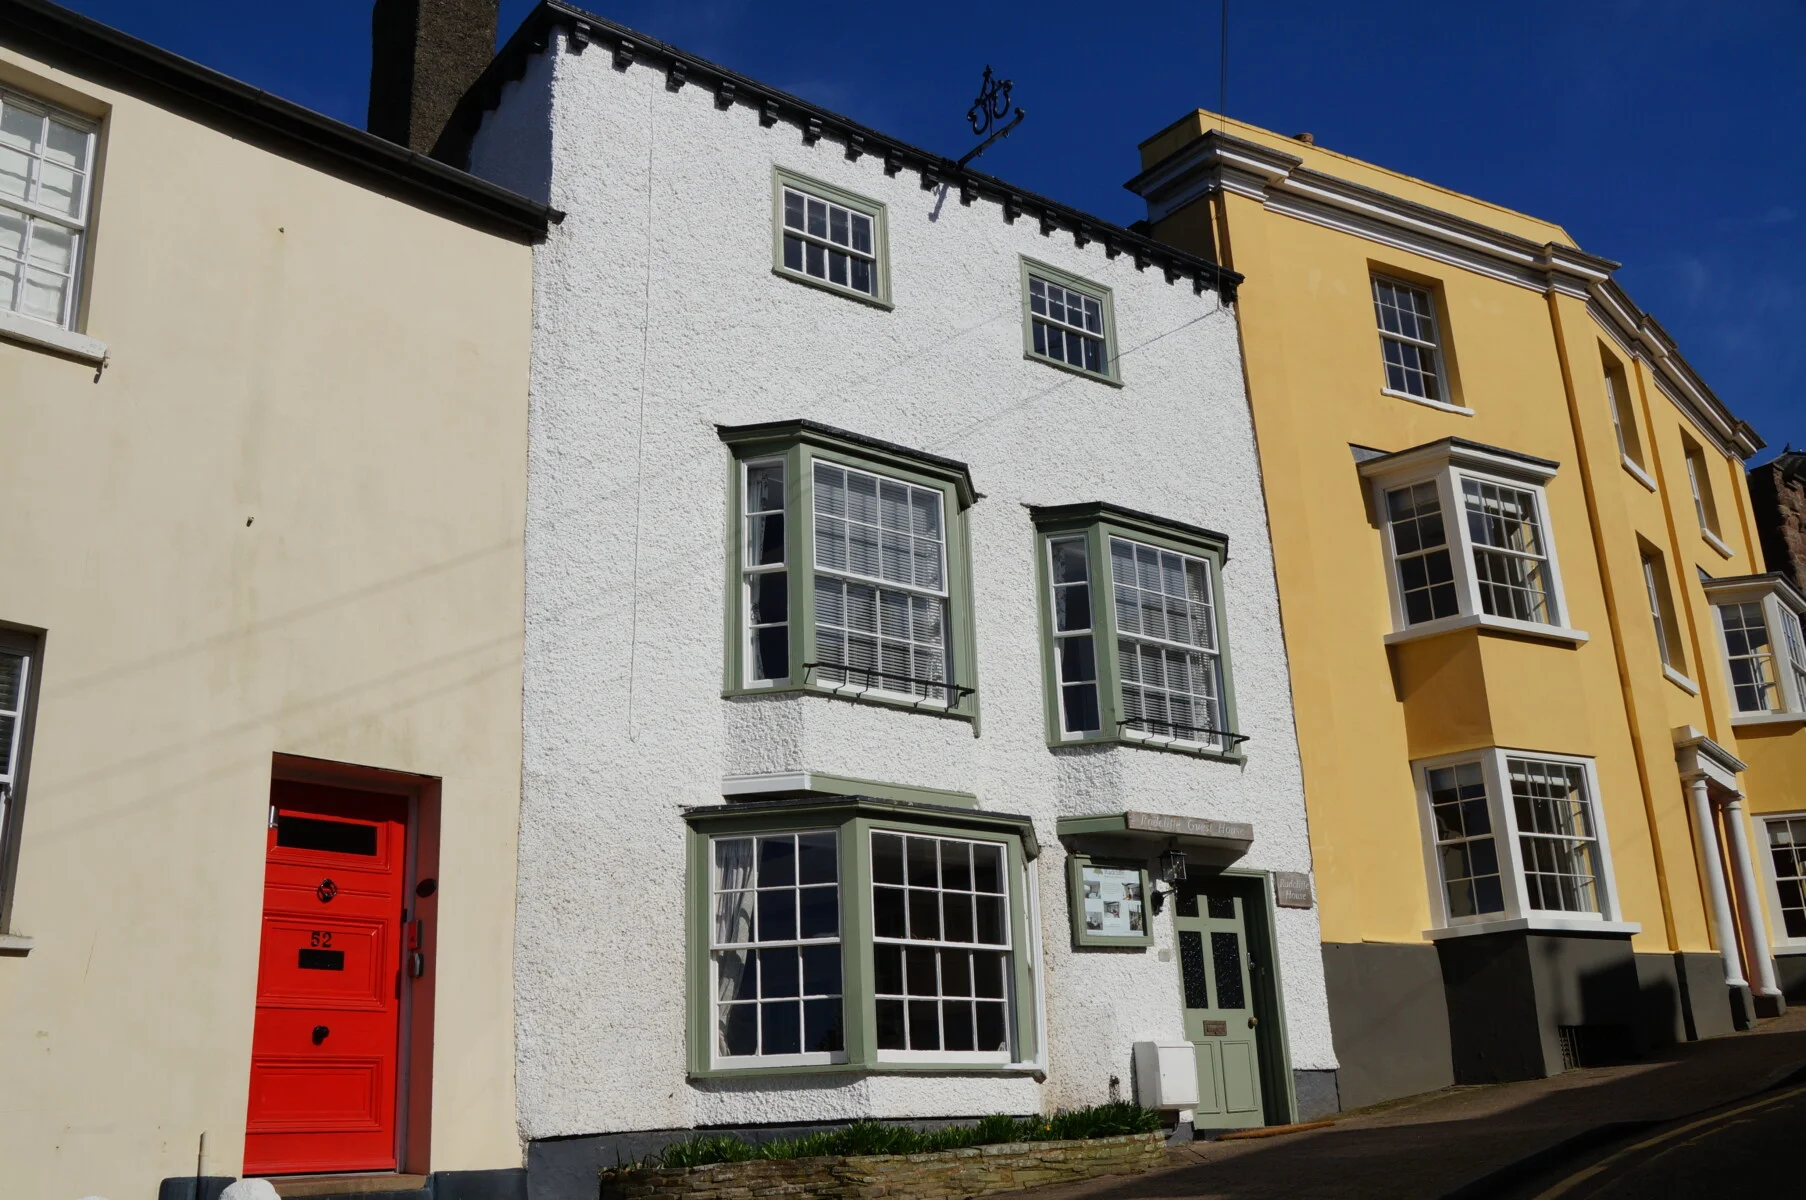 Radcliffe guest house ross on wye herefordshire